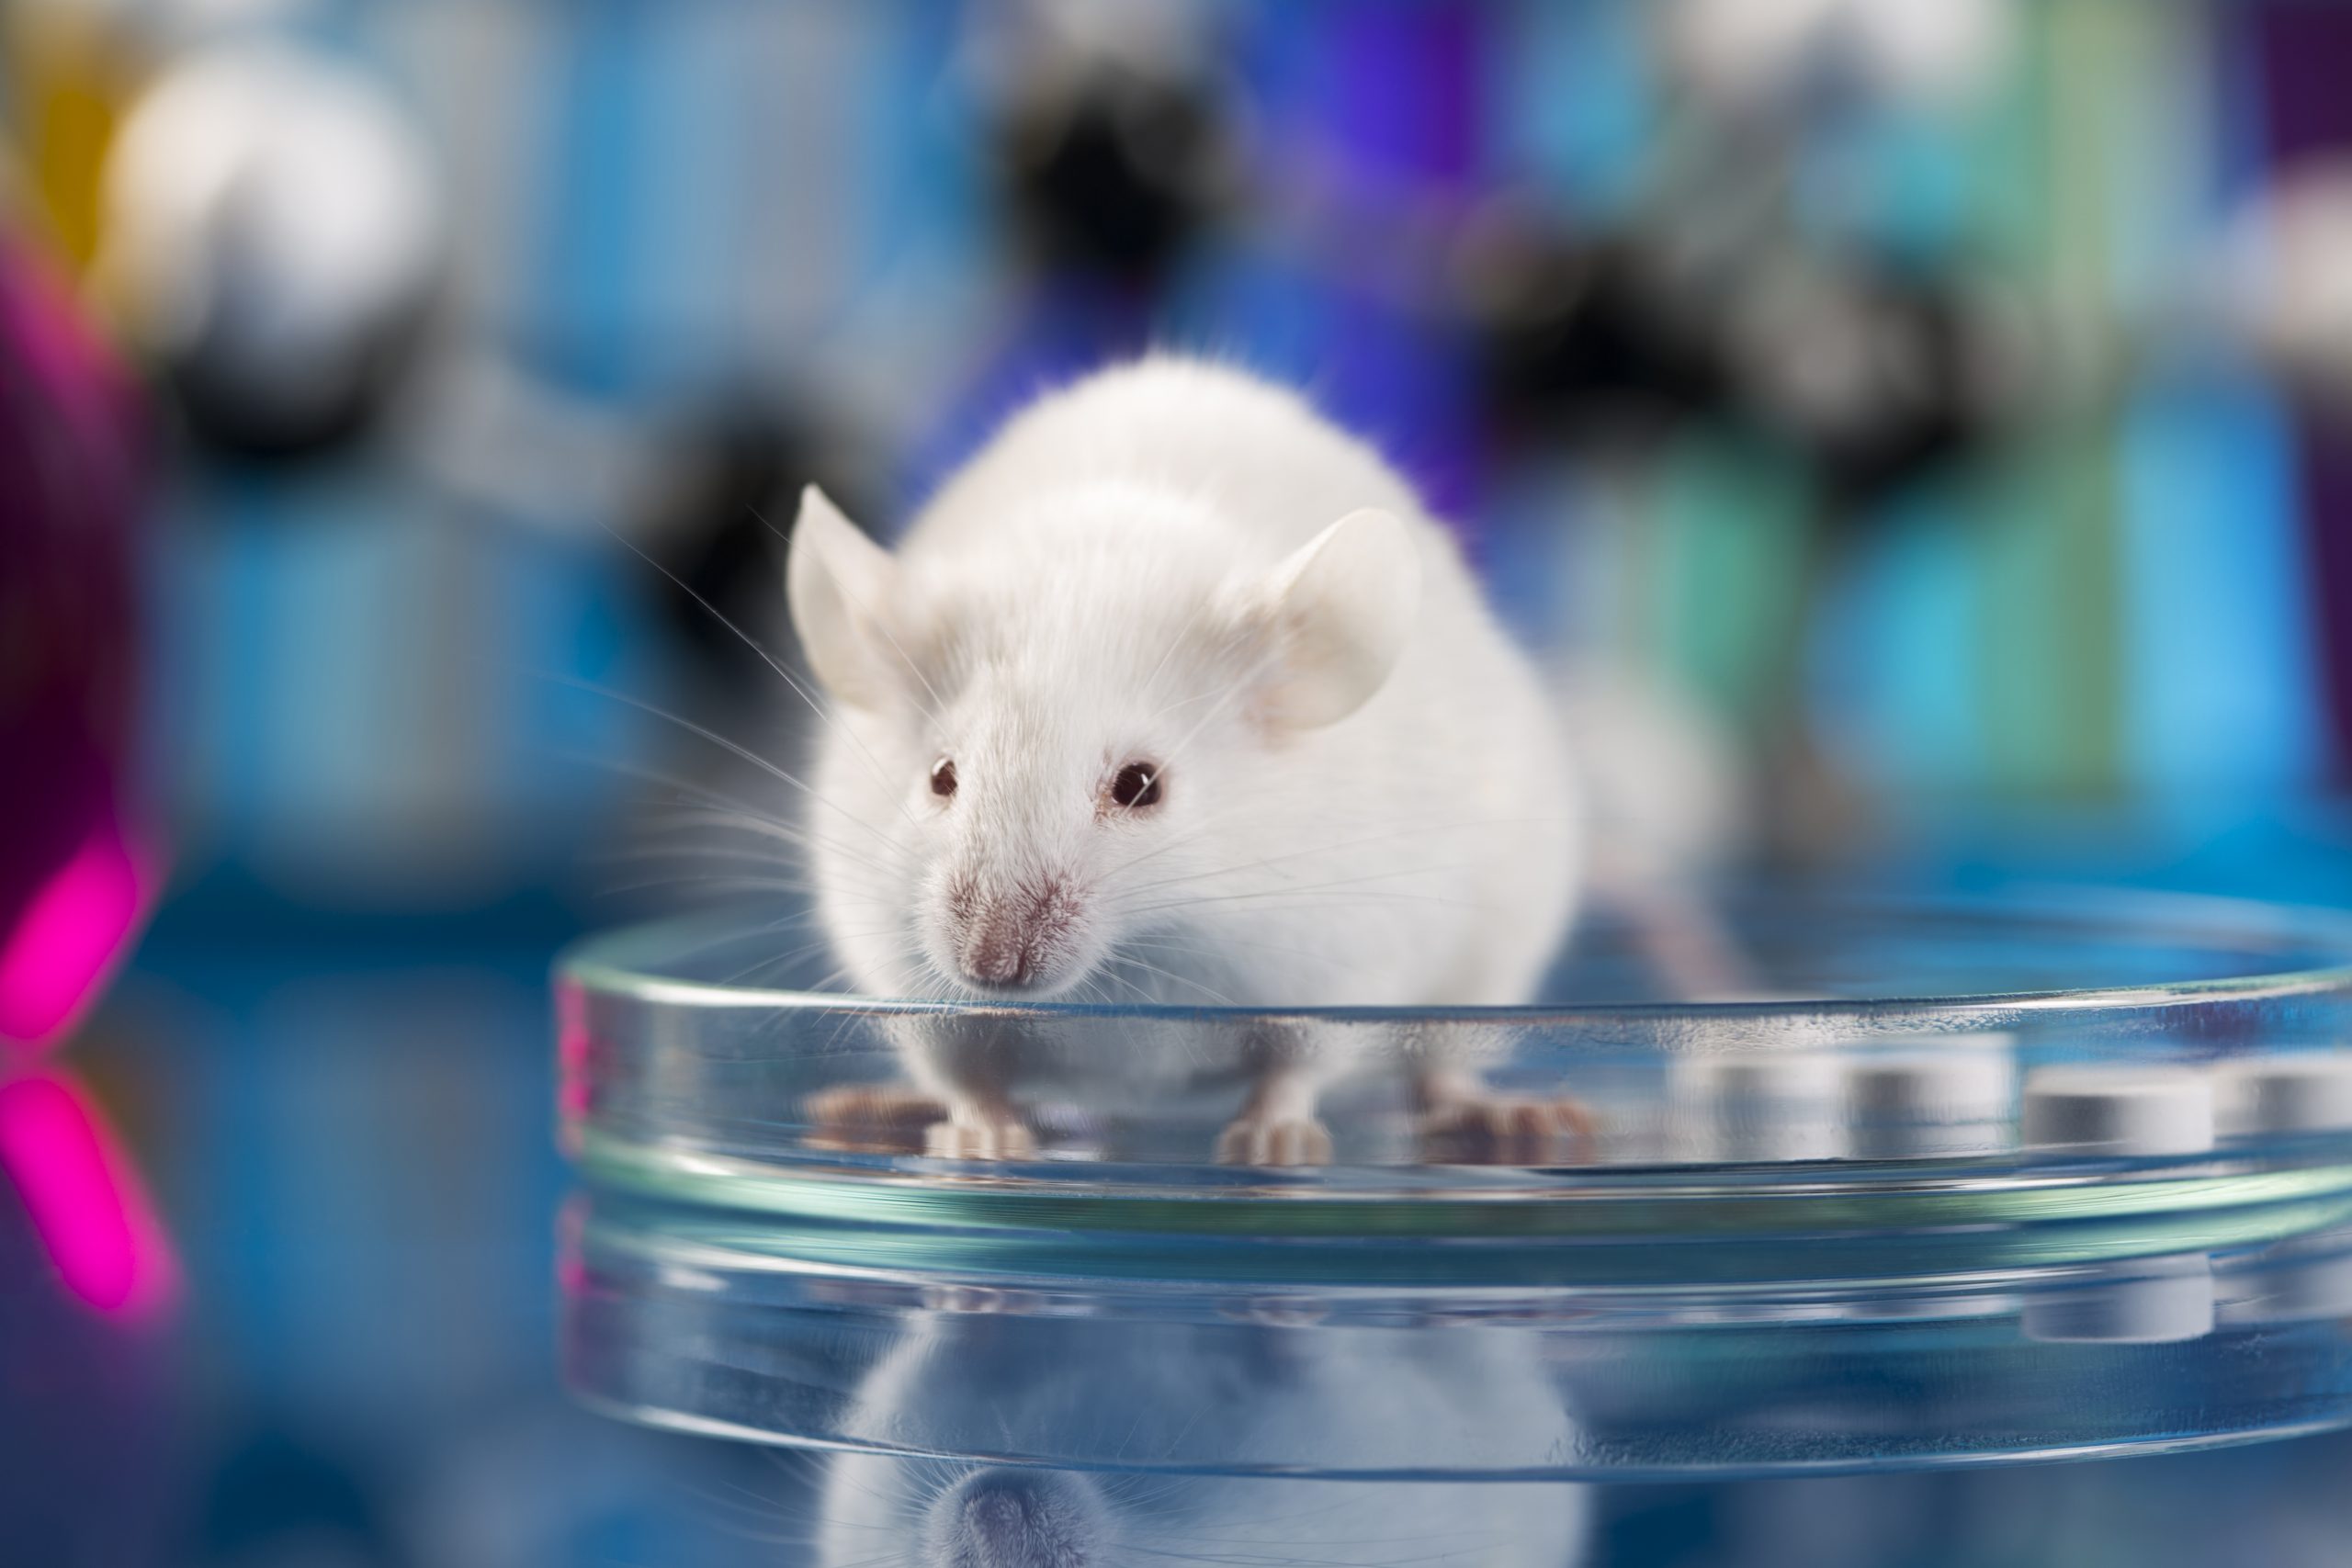 Scientists Successfully “Reprogram” Cells in Mice to Reverse Aging. Credit: DepositPhotos